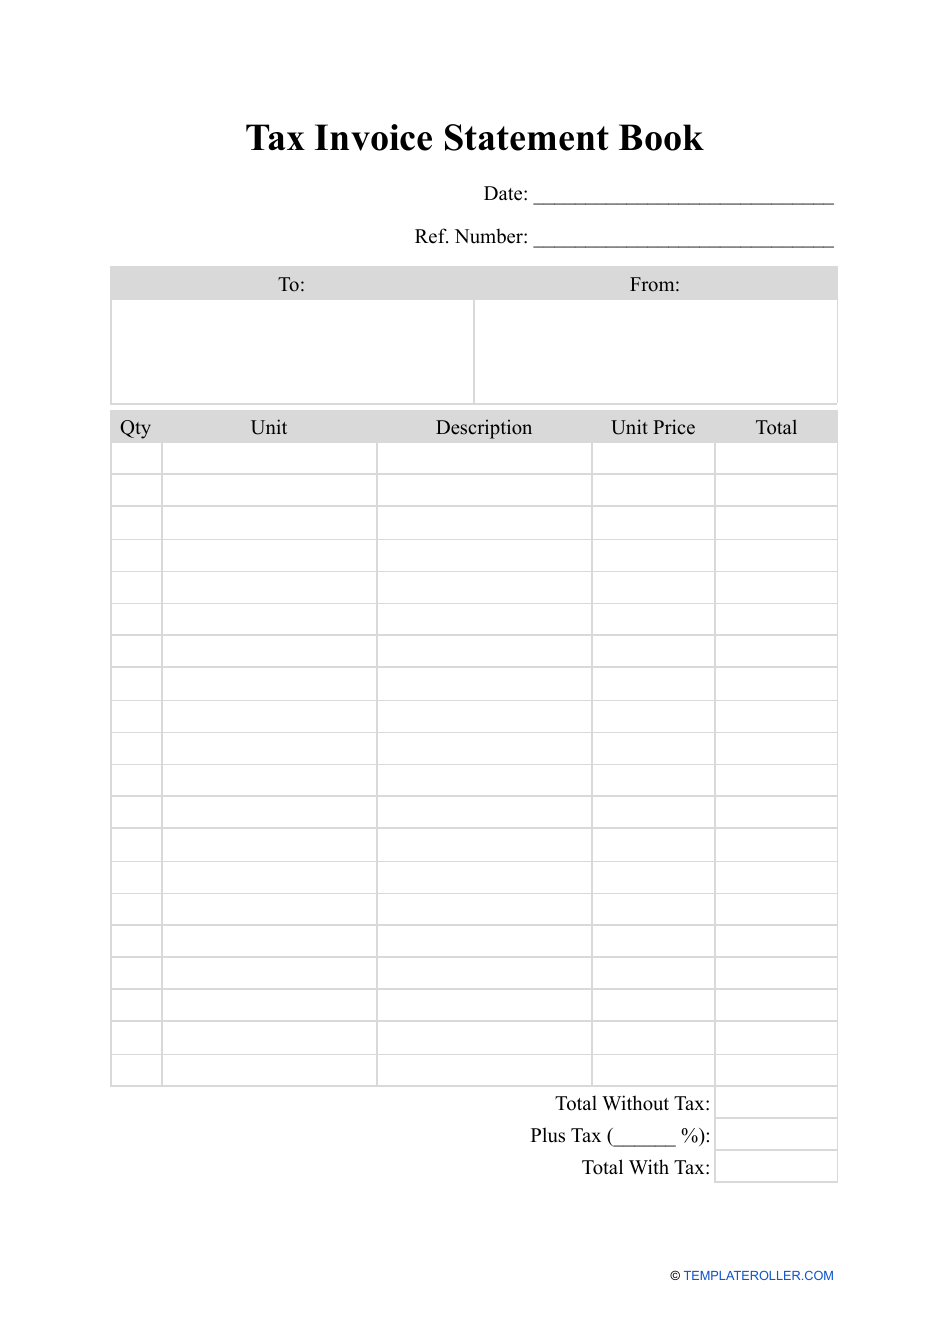 Tax Invoice Statement Book Template - Fill Out, Sign Online and ...